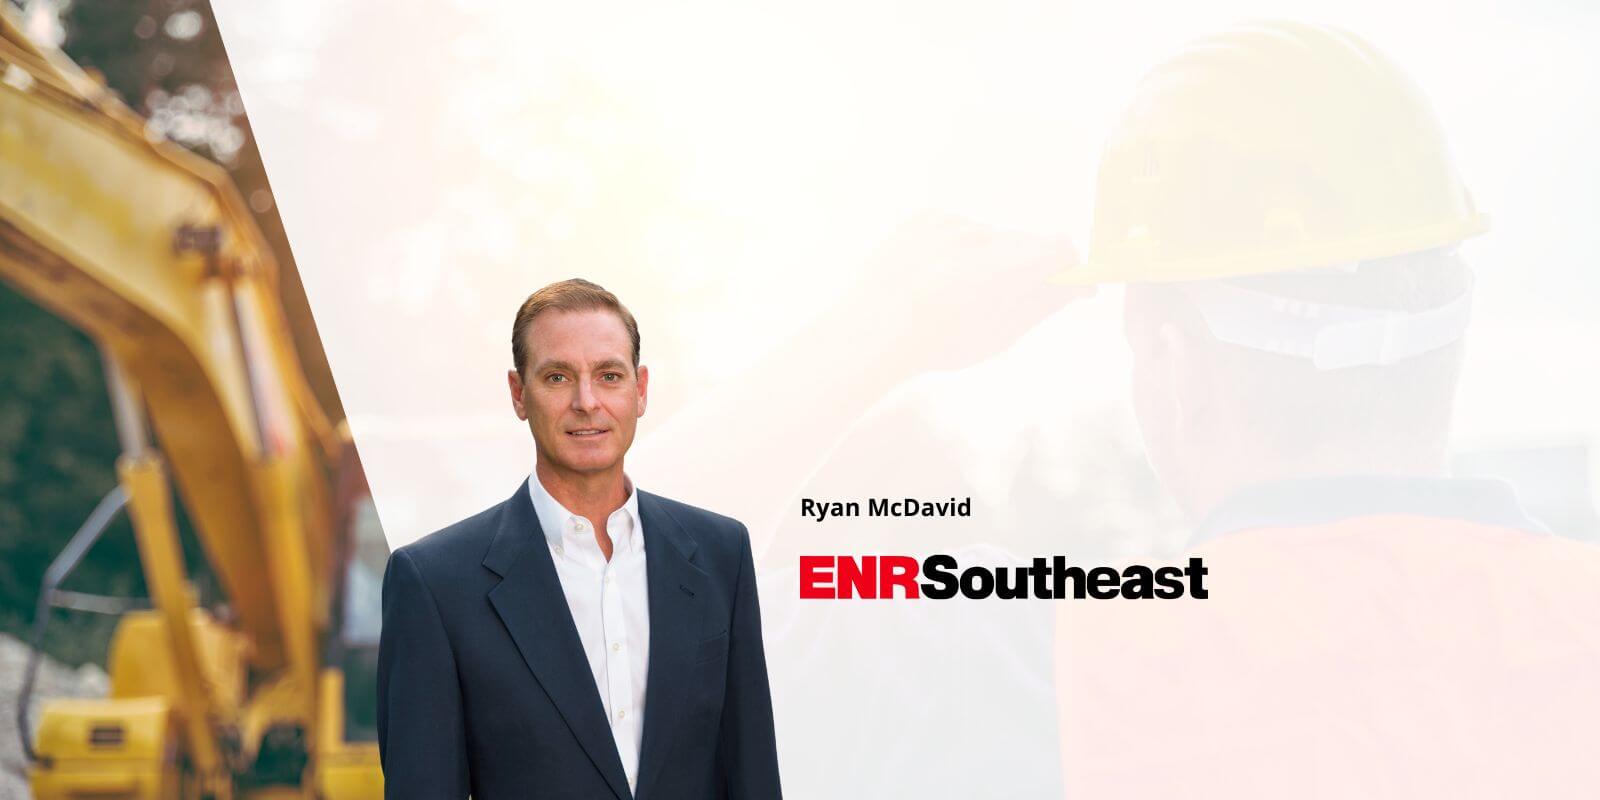 Featured image for “Ryan McDavid featured in ENR Southeast Magazine”